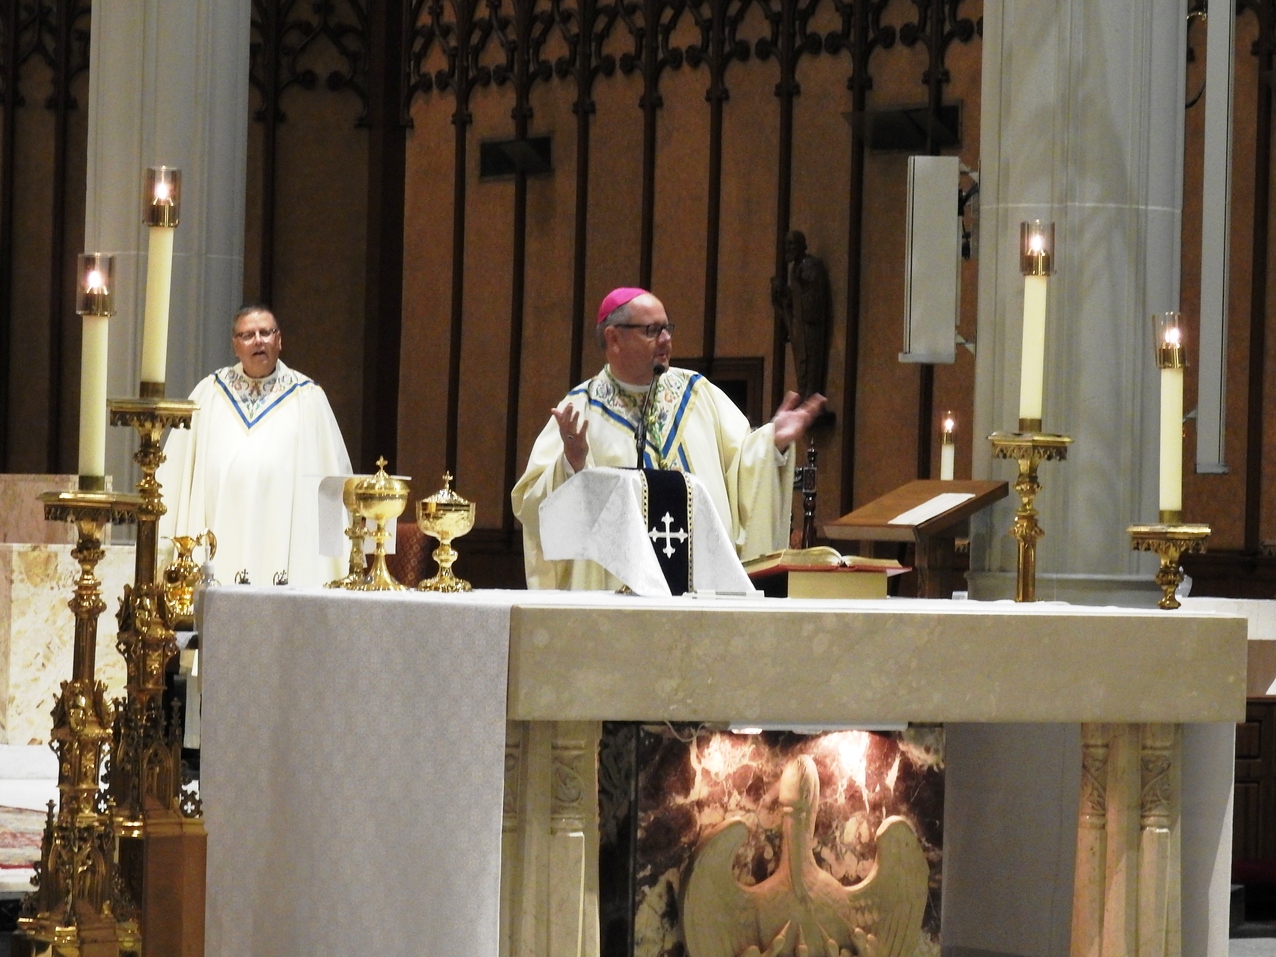 ‘Please pray for me’ newly appointed Bishop Malesic asks faithful in Diocese of Cleveland